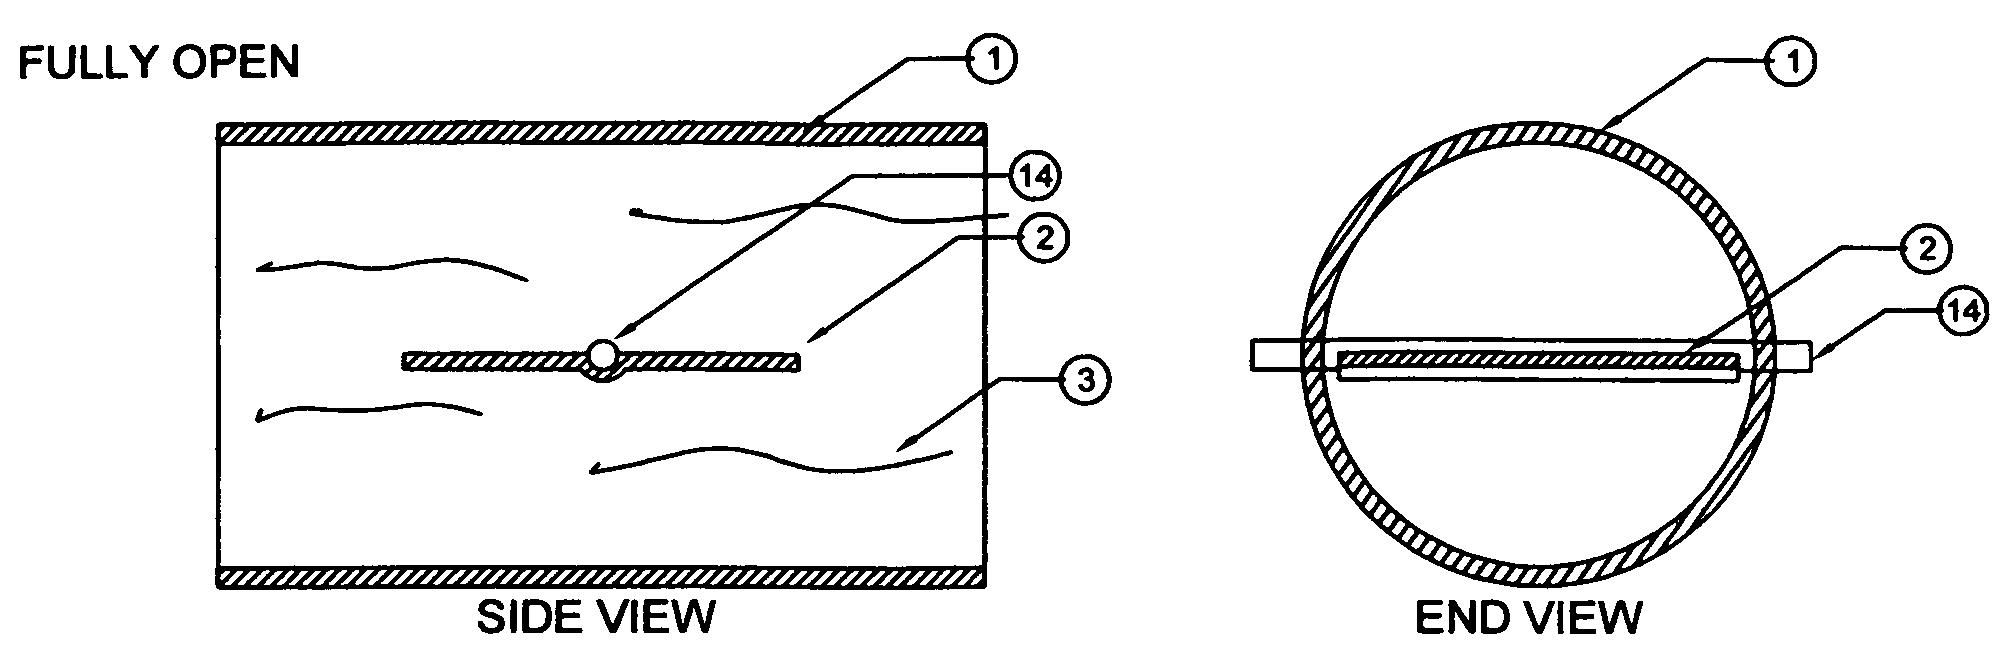 Air flow control damper with linear performance characteristics comprising an air foil control blade and inner annular orifice